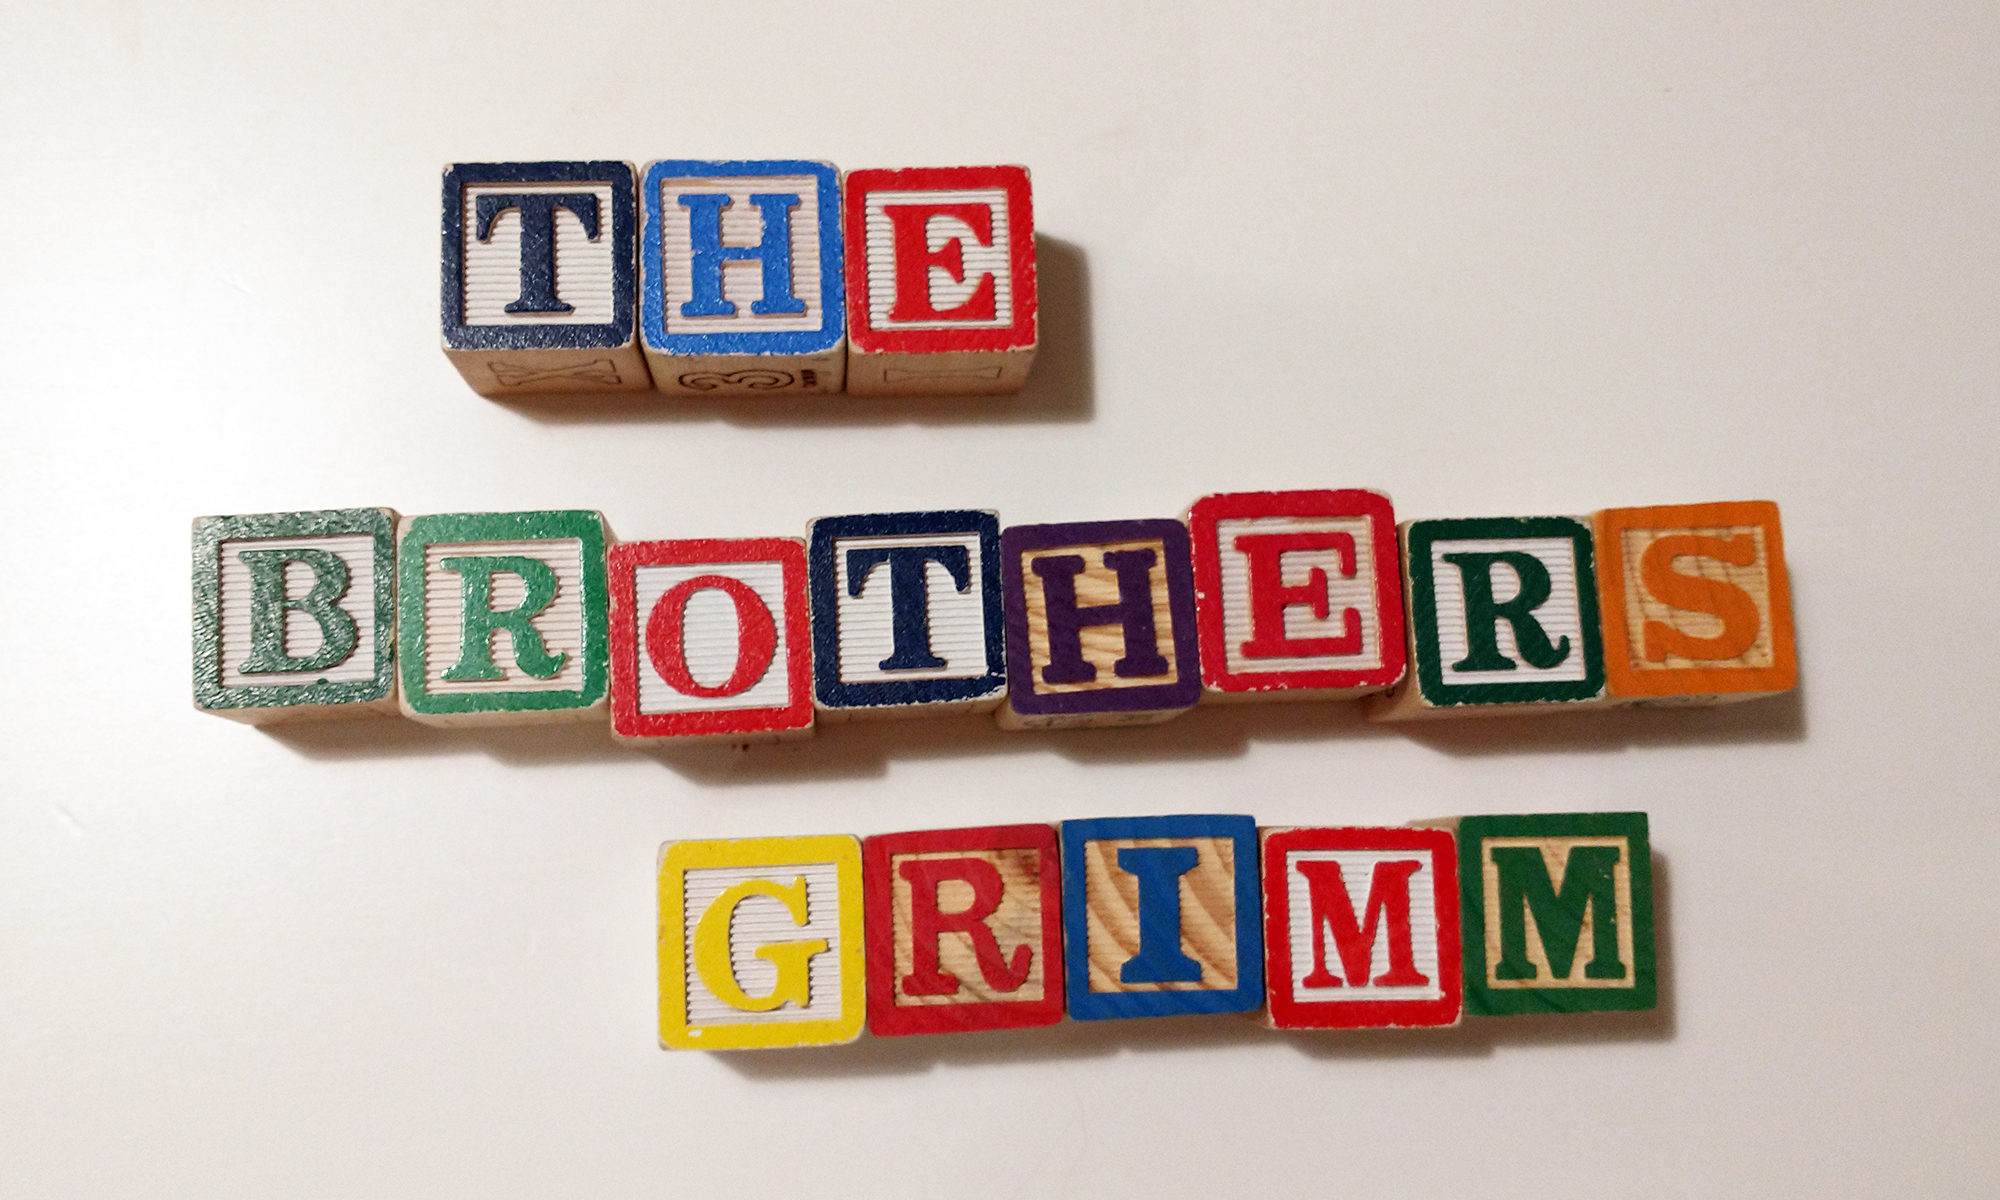 How the Brothers Grimm Saved Folk Culture